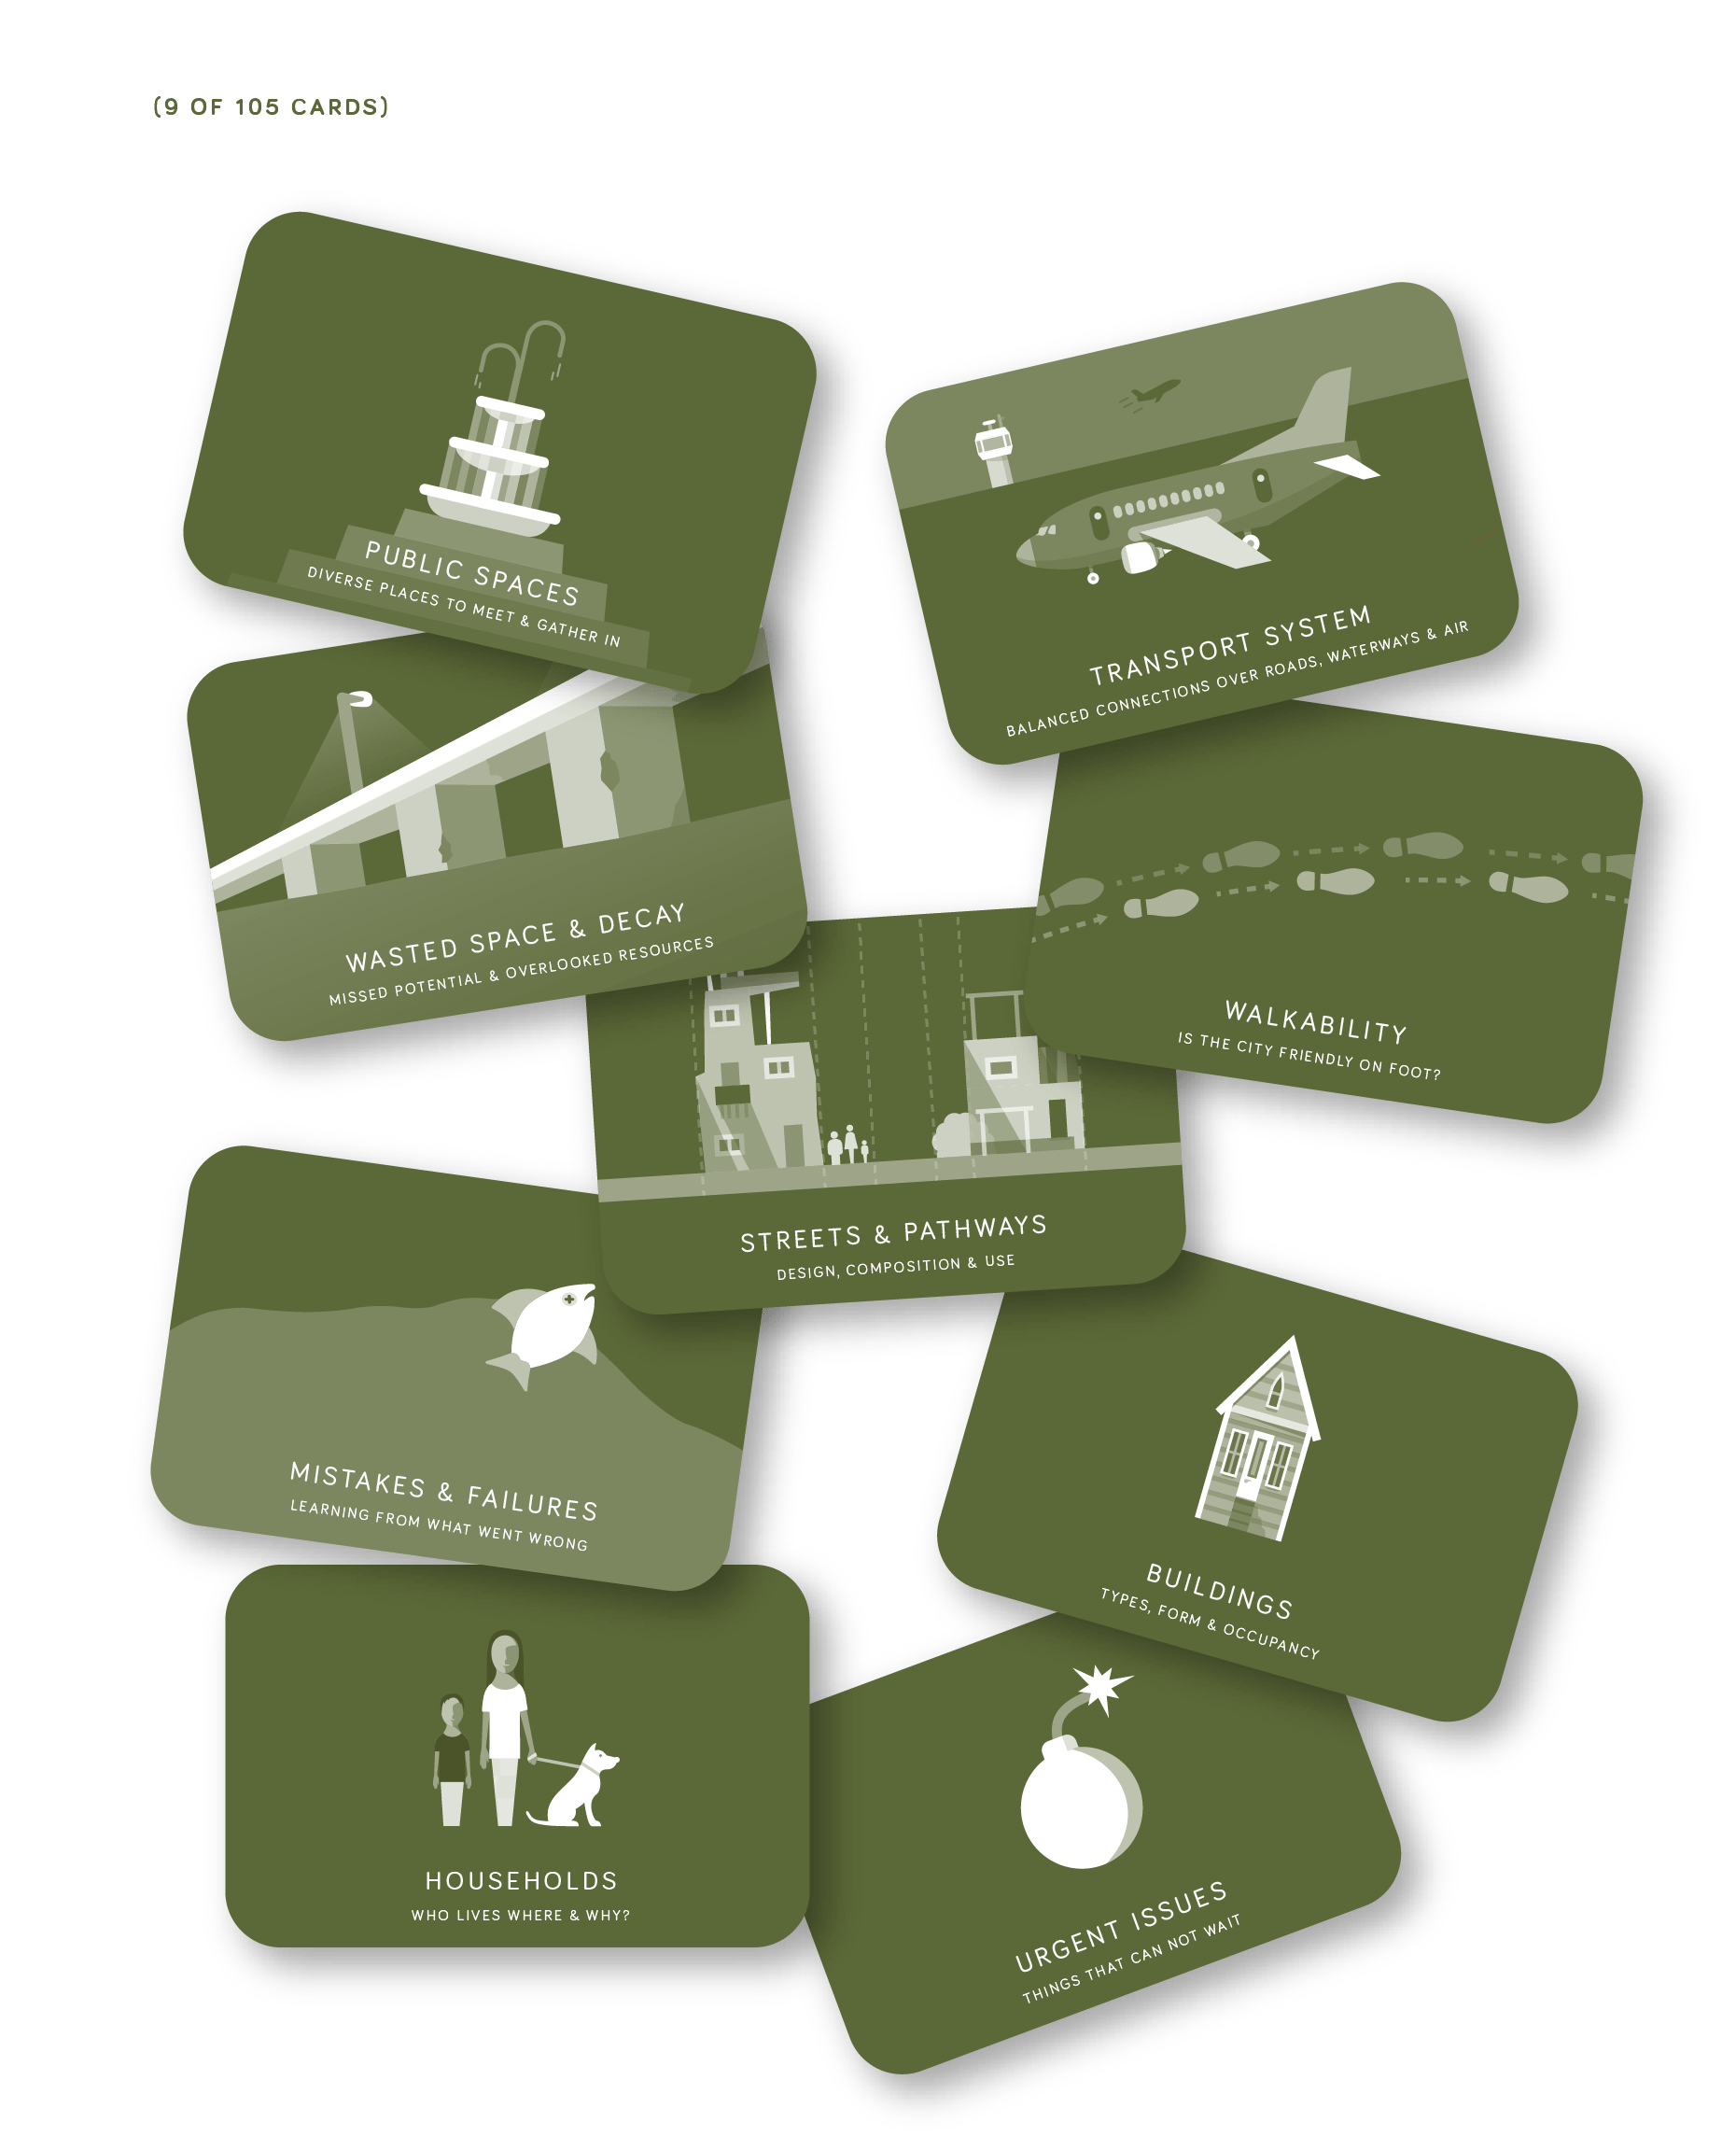 MethodKit for Cities Cards